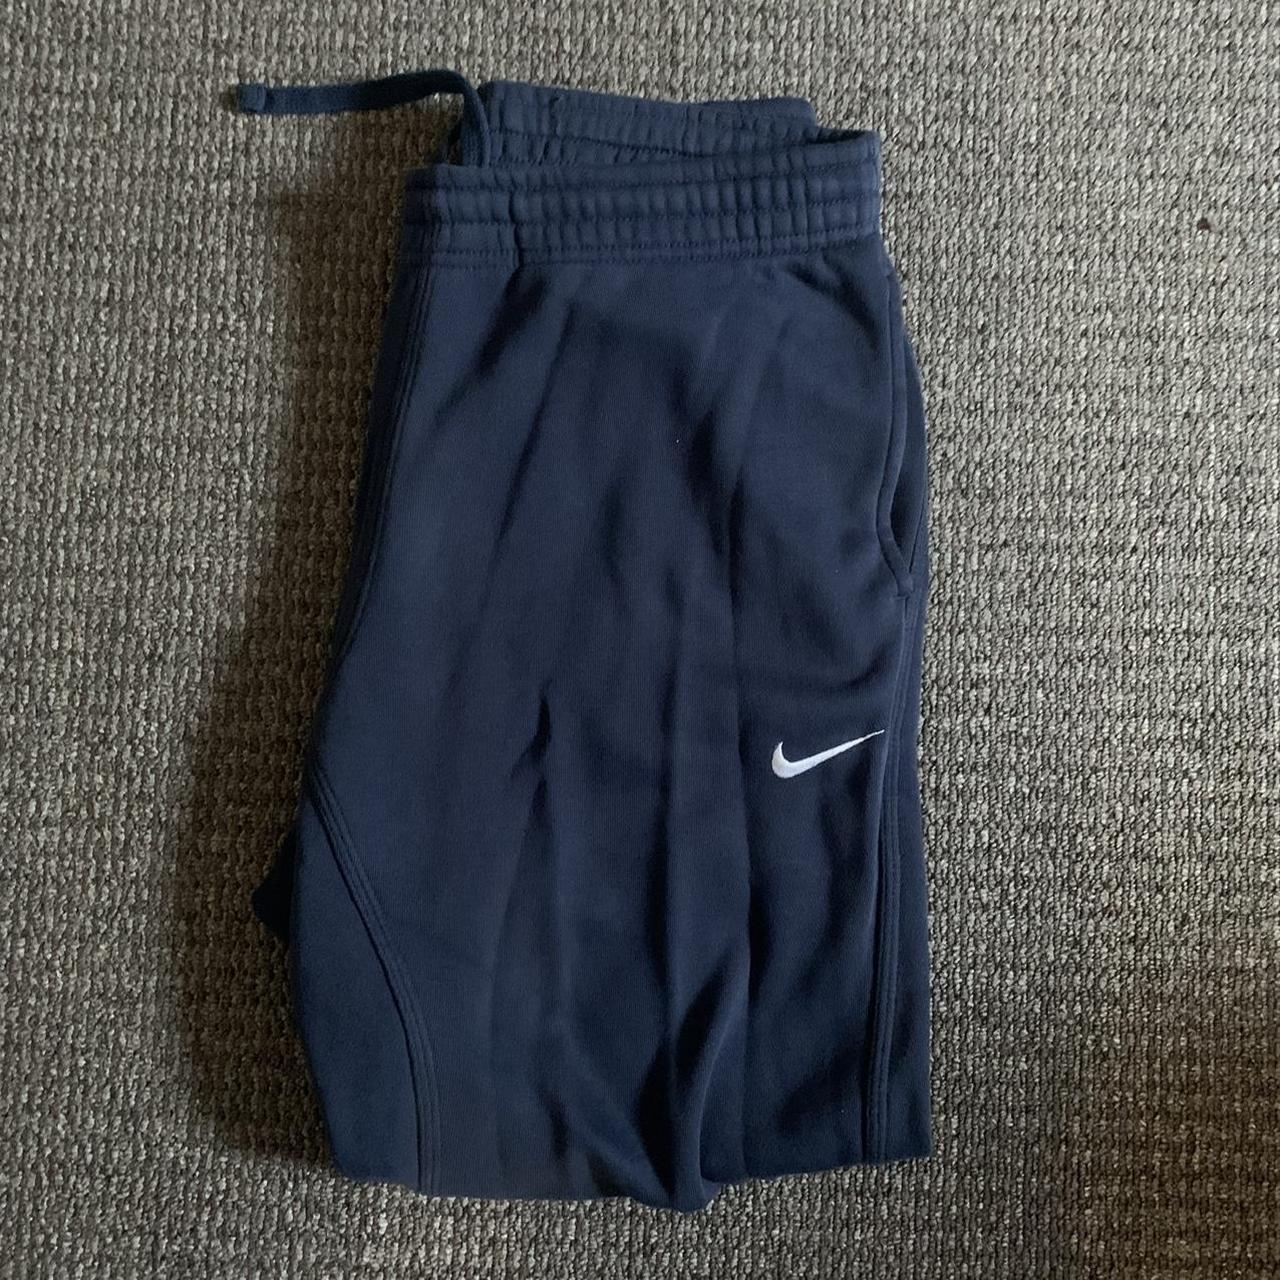 Nike tracksuit bottoms in a size Large. These track... - Depop